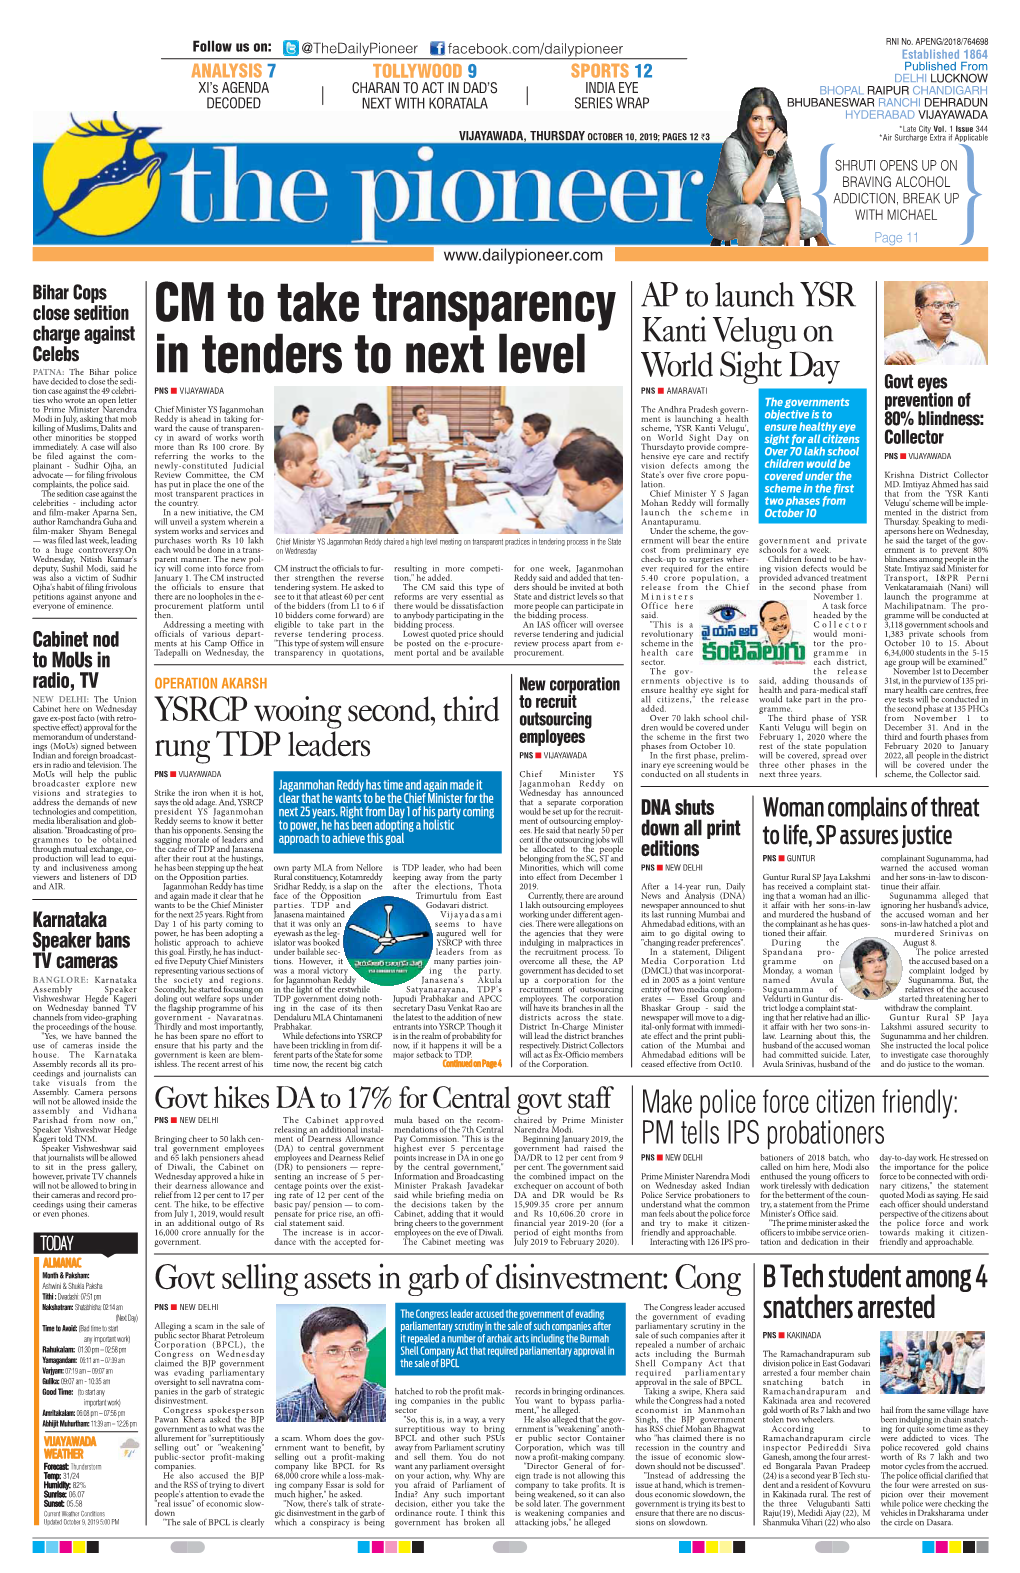 CM to Take Transparency in Tenders to Next Level